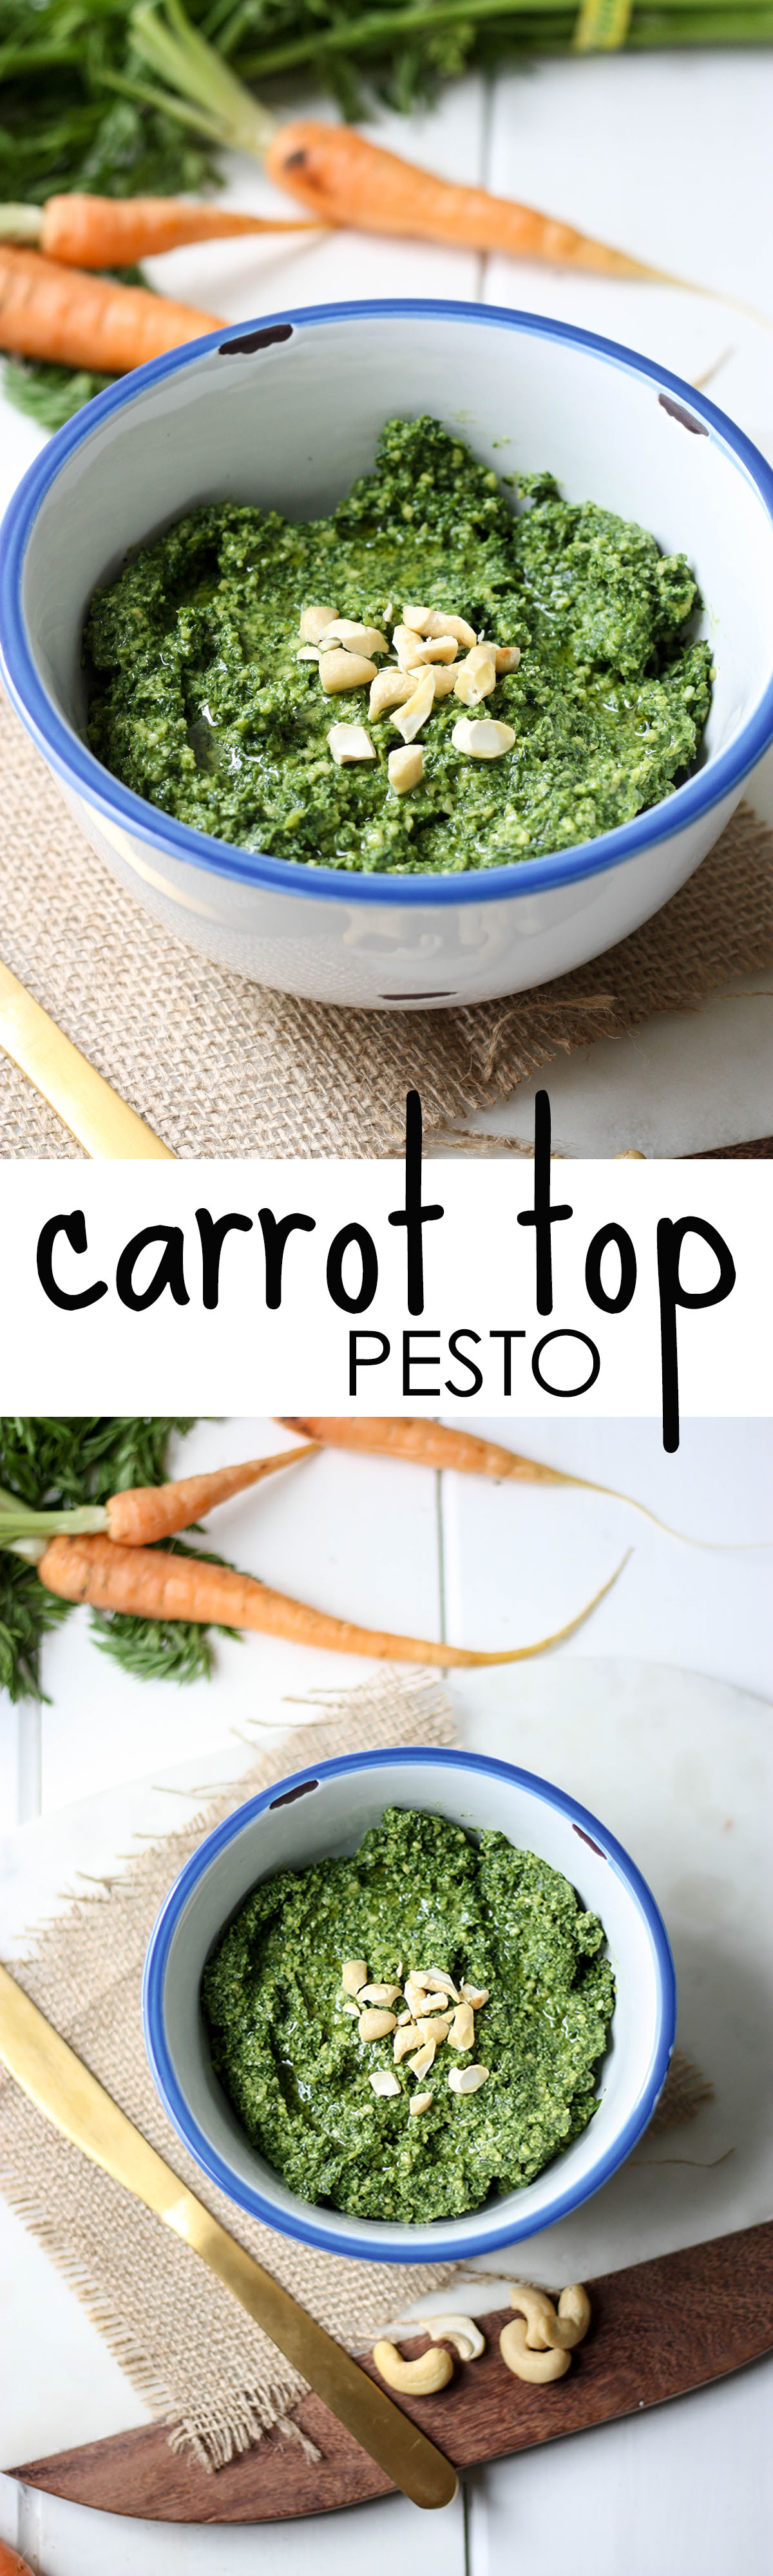 Carrot Top Pesto www.thehomecookskitchen.com - easy to make, super yum and reduces waste!